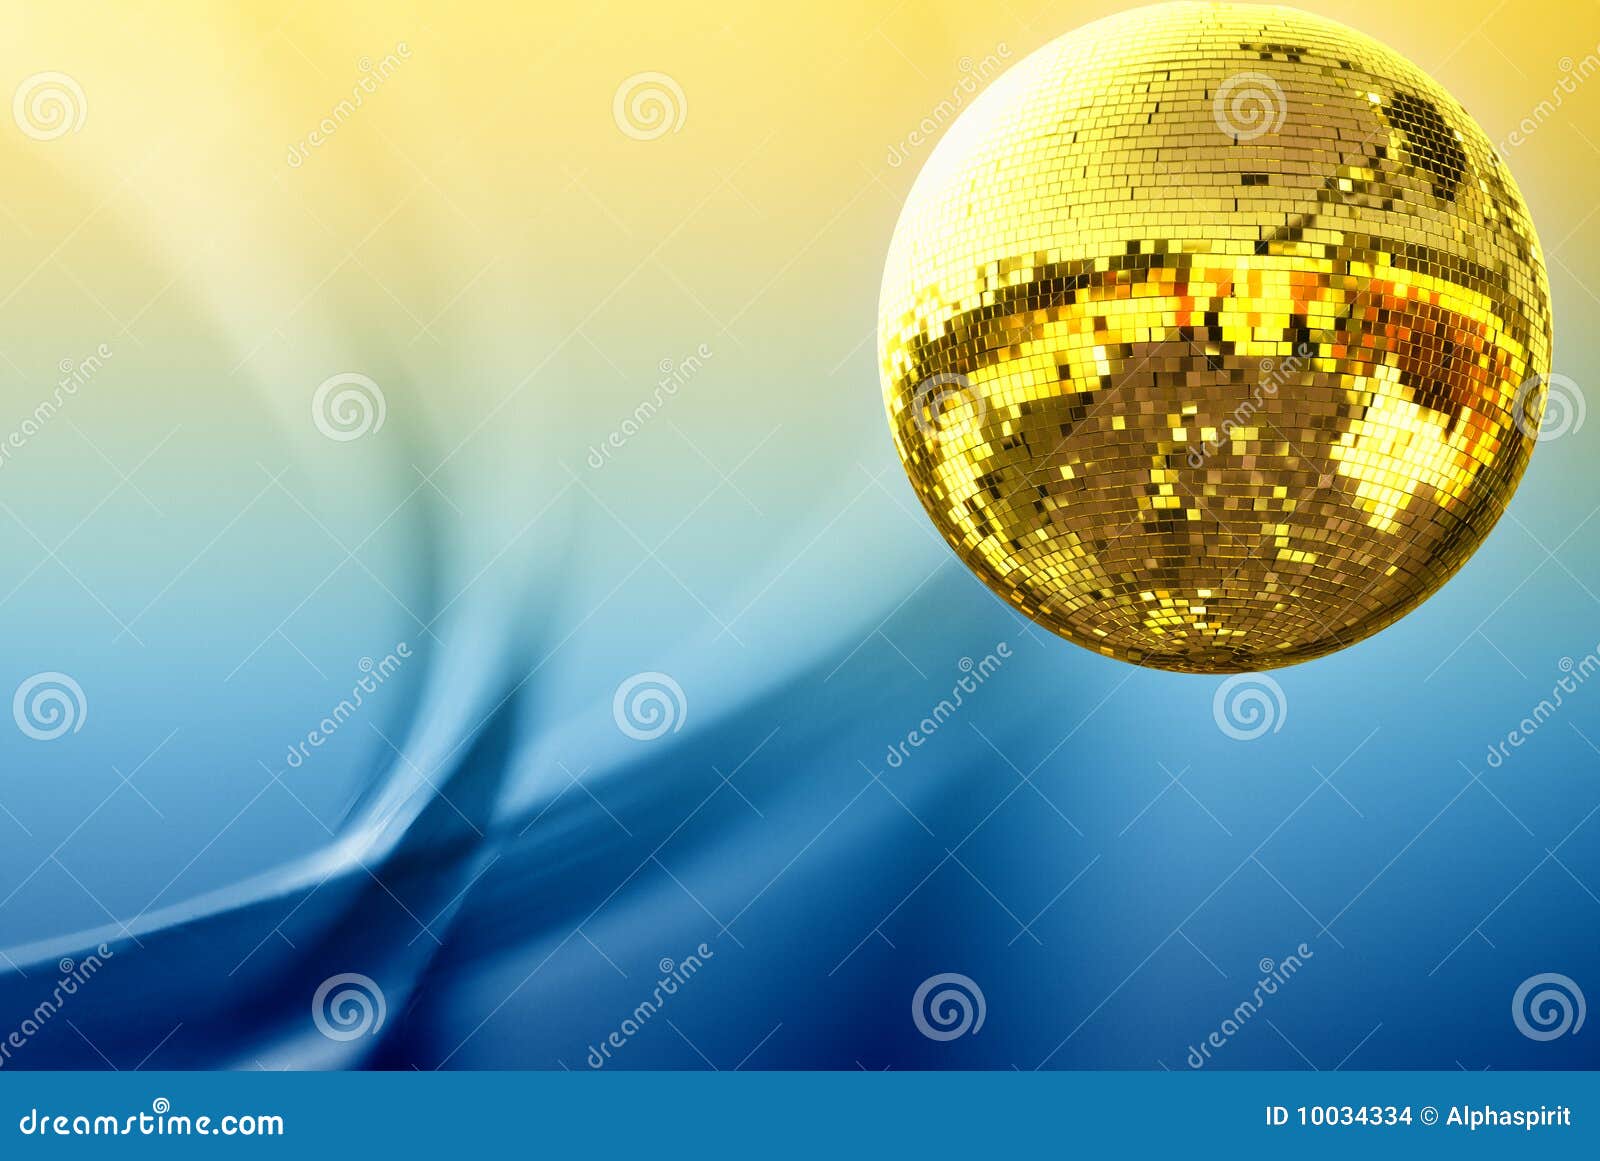 Golden Disco Ball Stock Photos and Pictures - 8,929 Images